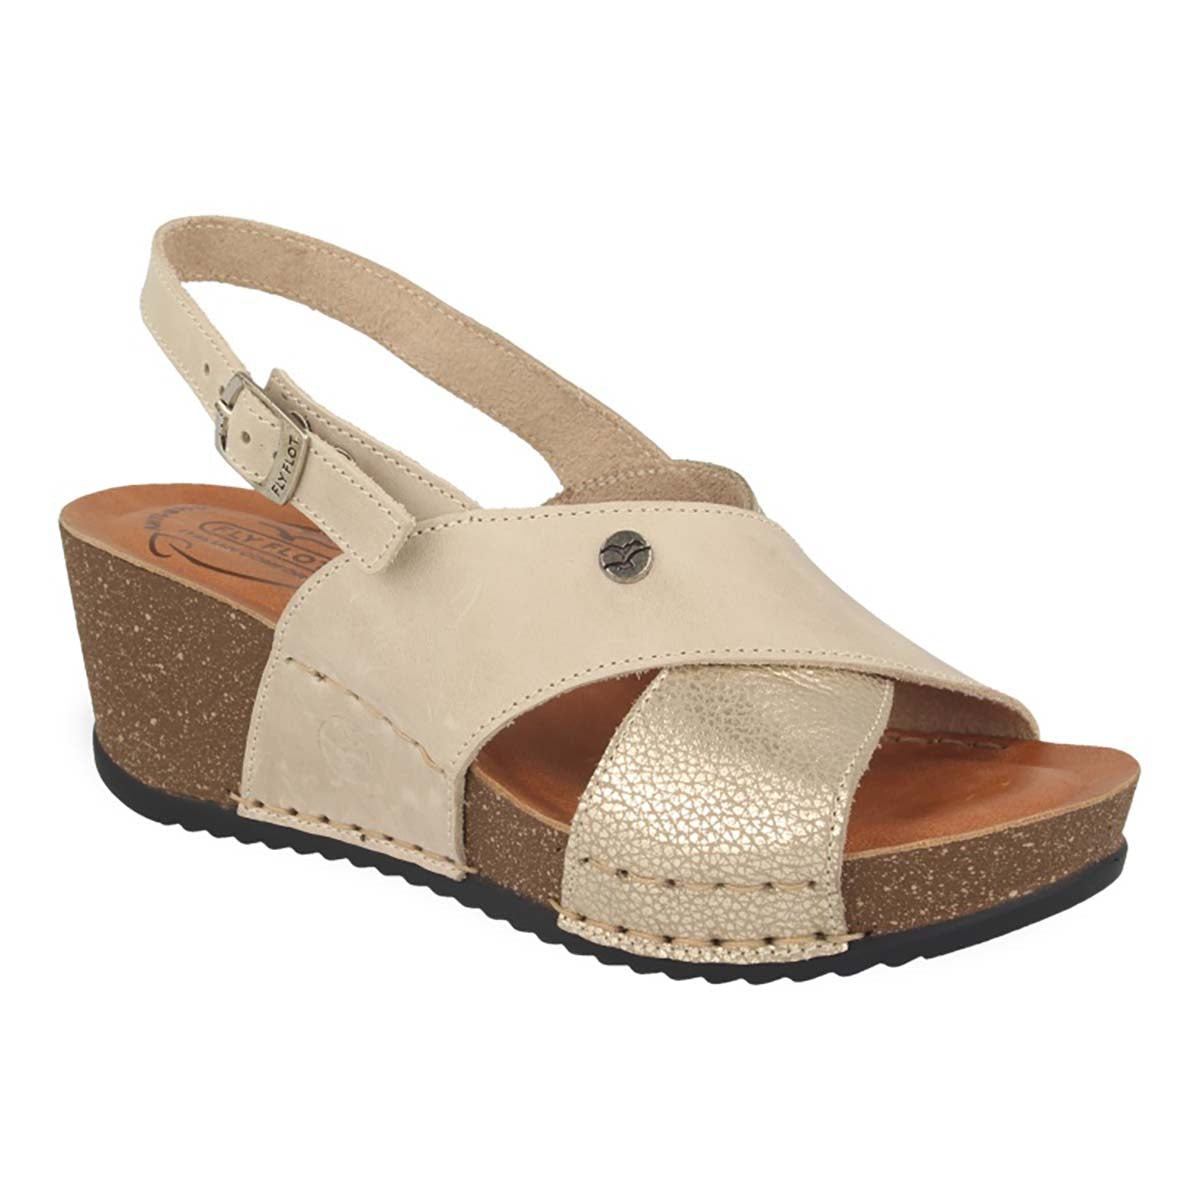 See photos Leather Woman Sandal Beige (33C631G)